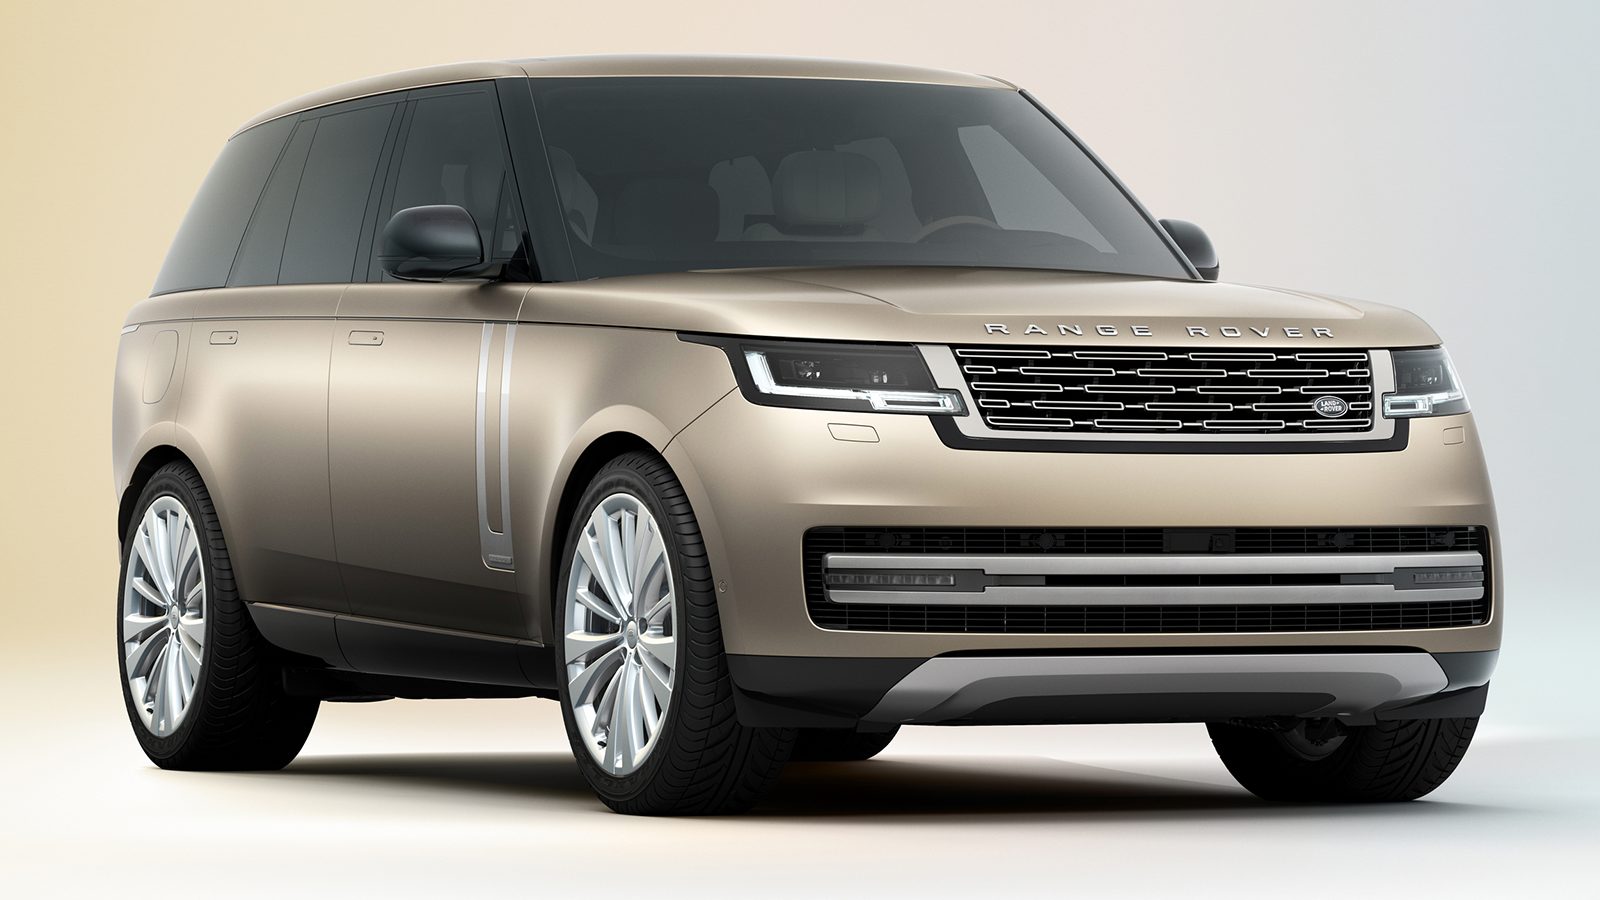 2022 Range Rover SUV Unveiled Globally, AllElectric Model to be